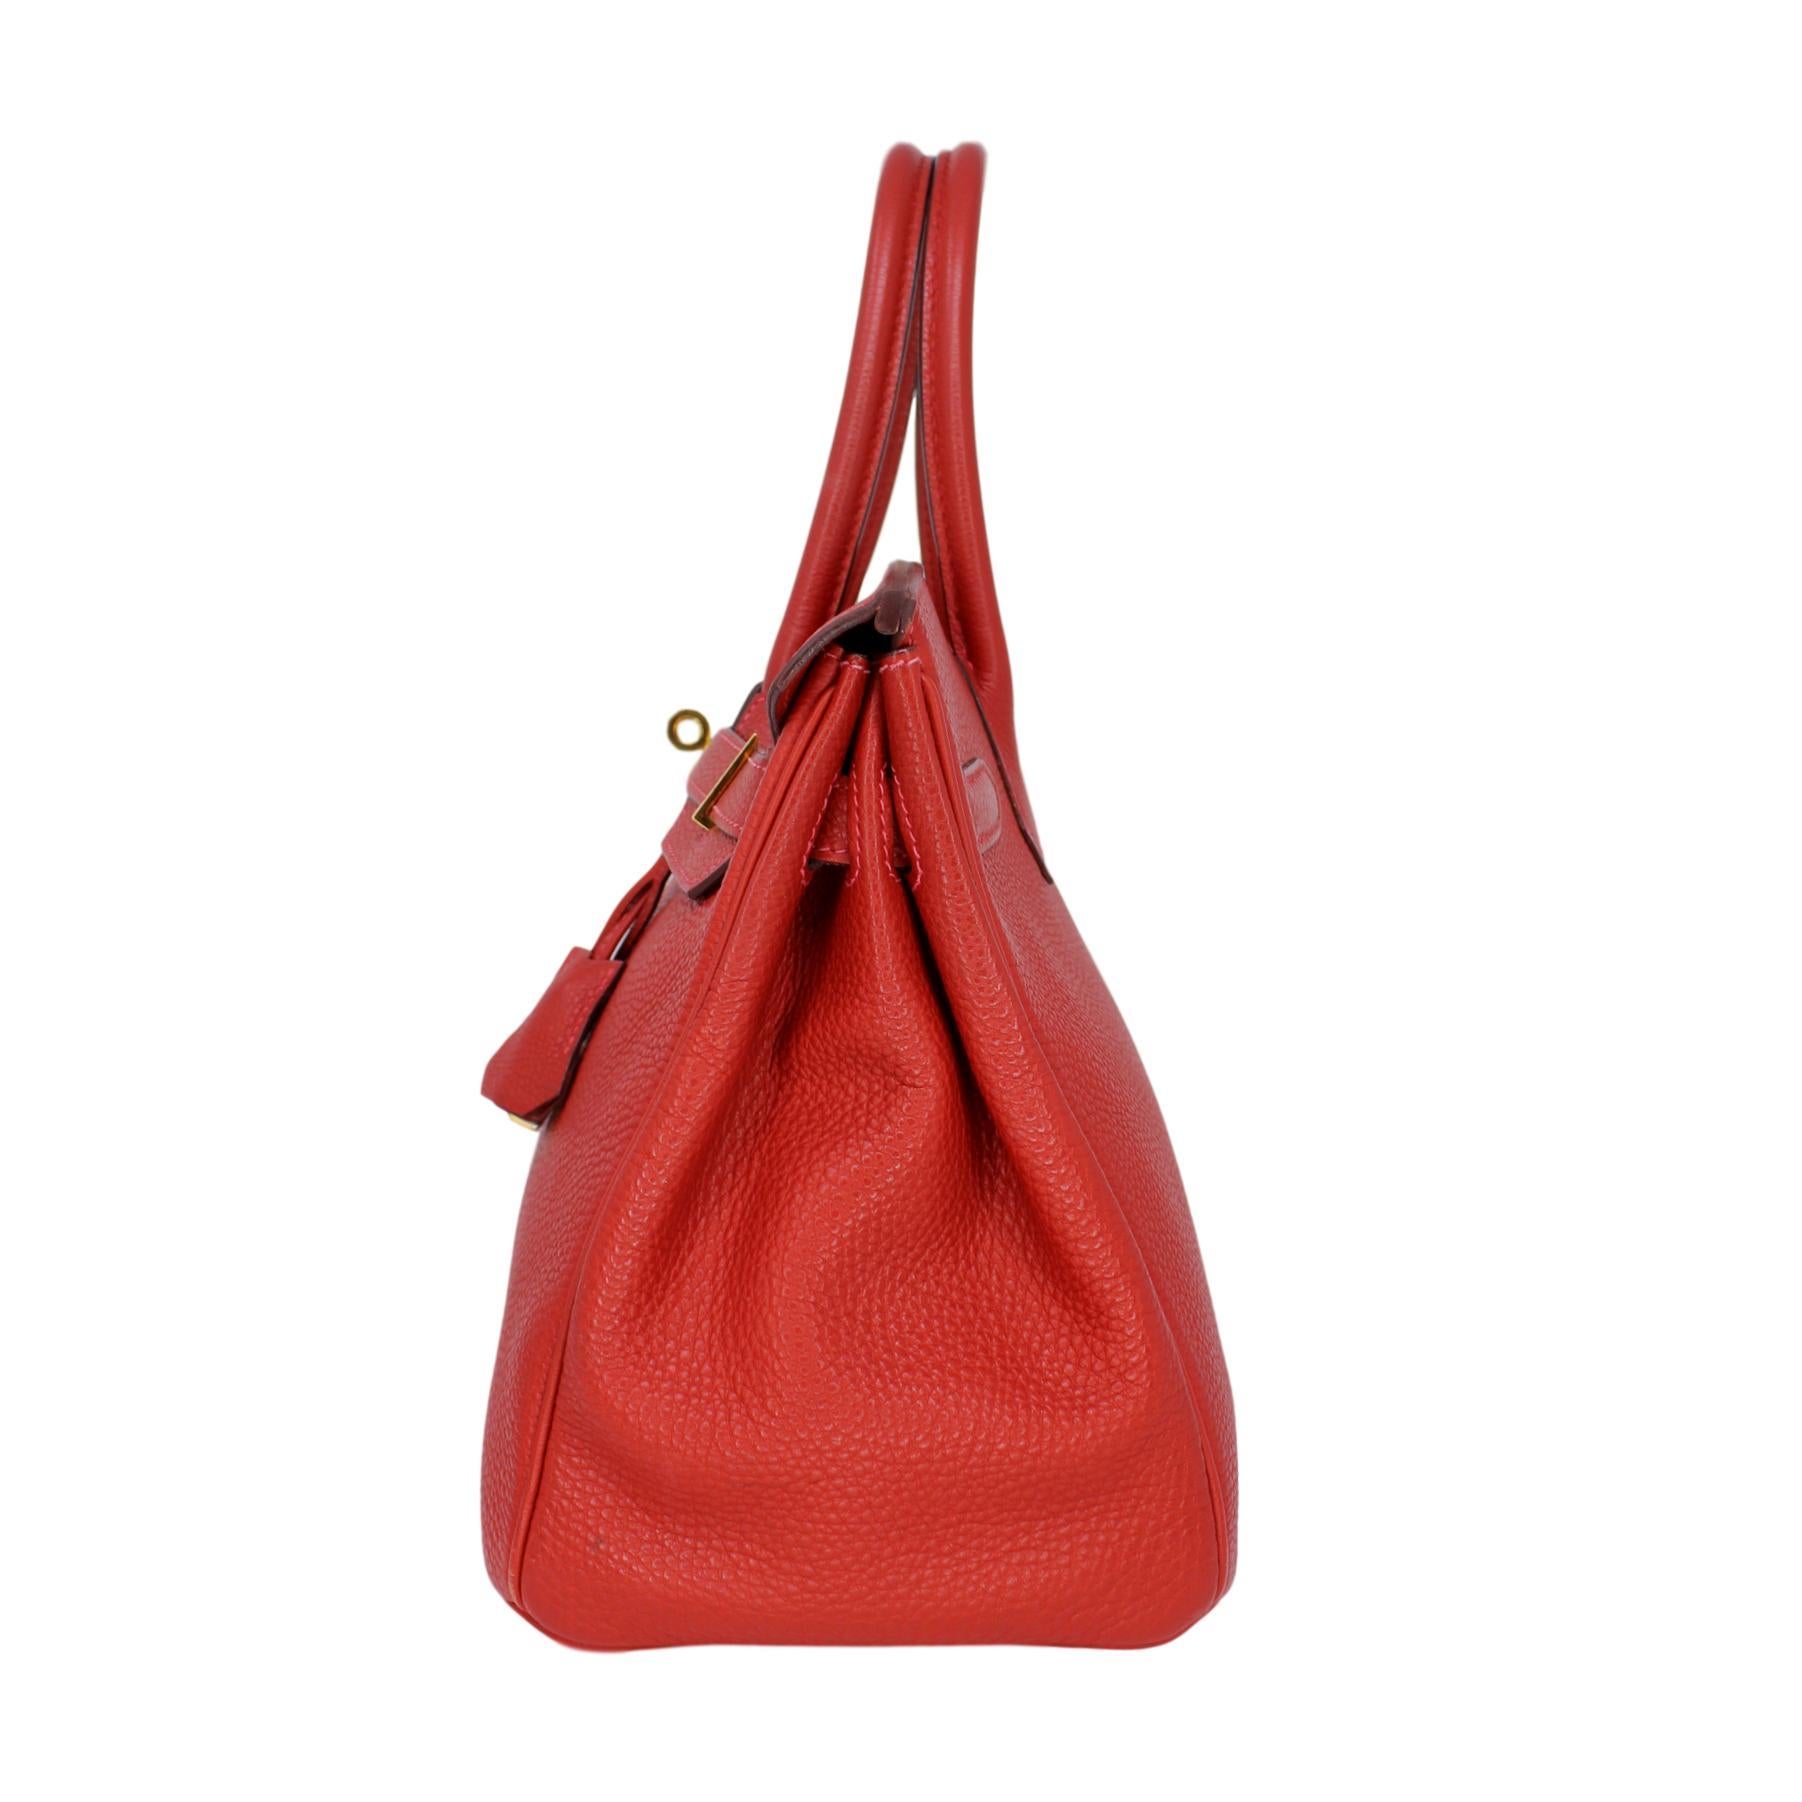 An intense red, this Hermes Birkin bag is the perfect pop of color to any ensemble. 
It is crafted in Togo leather with two rolled top handles and a flap closure. 
This is the 30cm size which is a compact size that can be enjoyed day or night. 
It